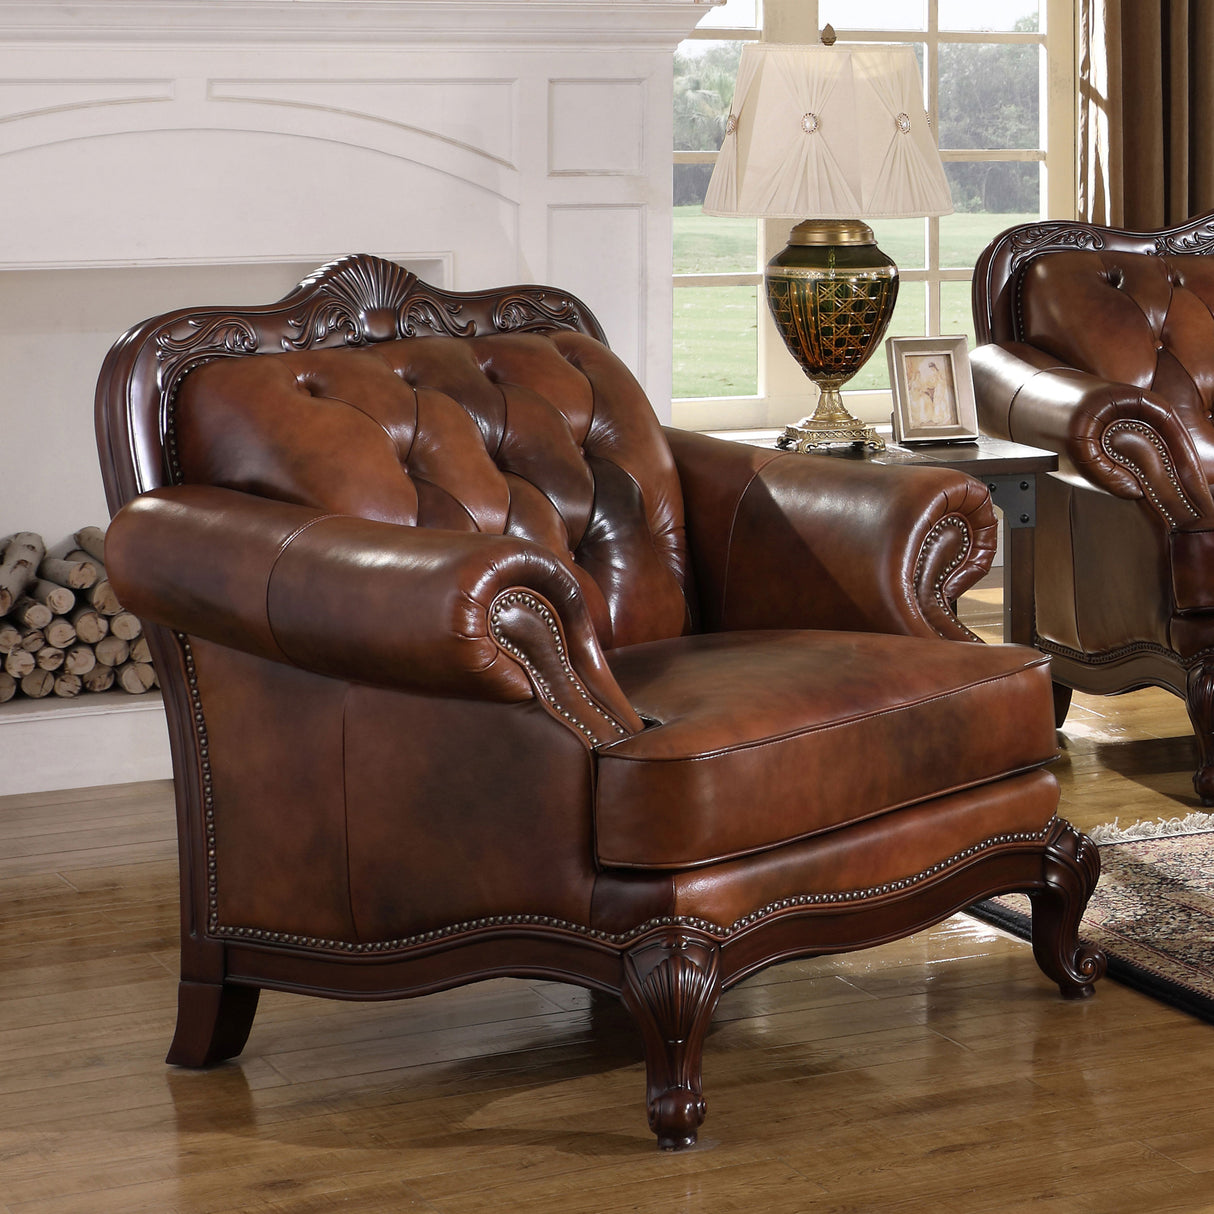 Chair - Victoria Rolled Arm Chair Tri-tone and Brown